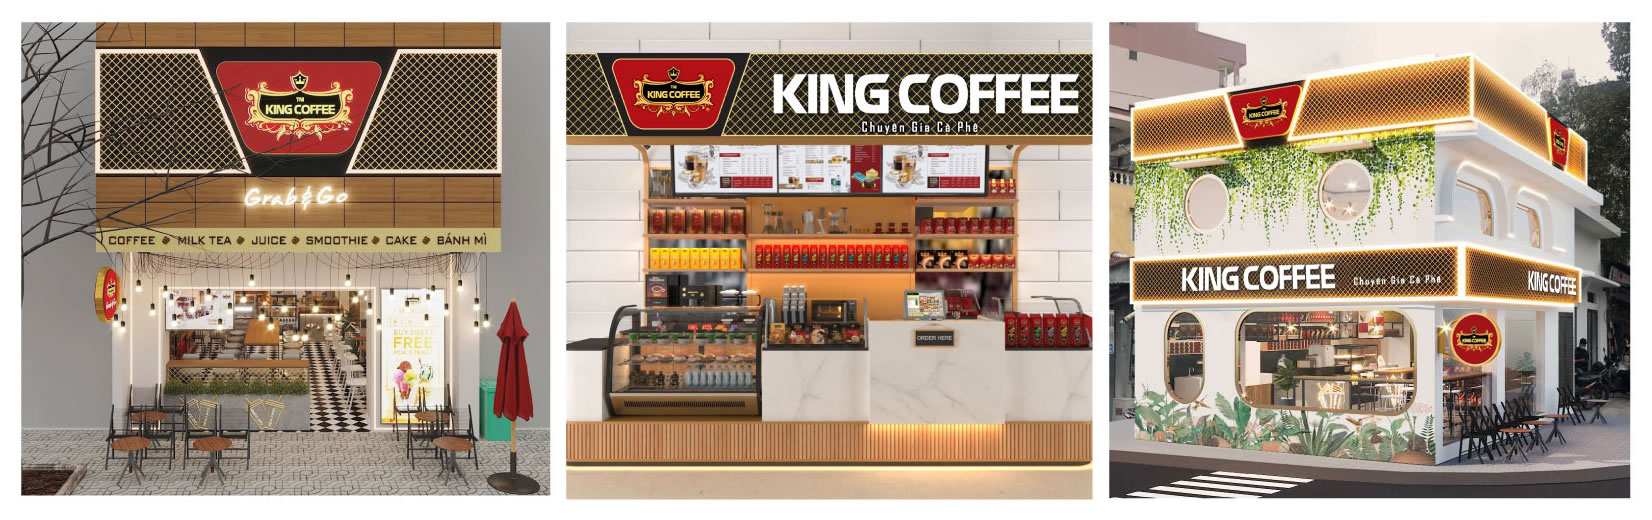 King coffee - stores without drive-thru